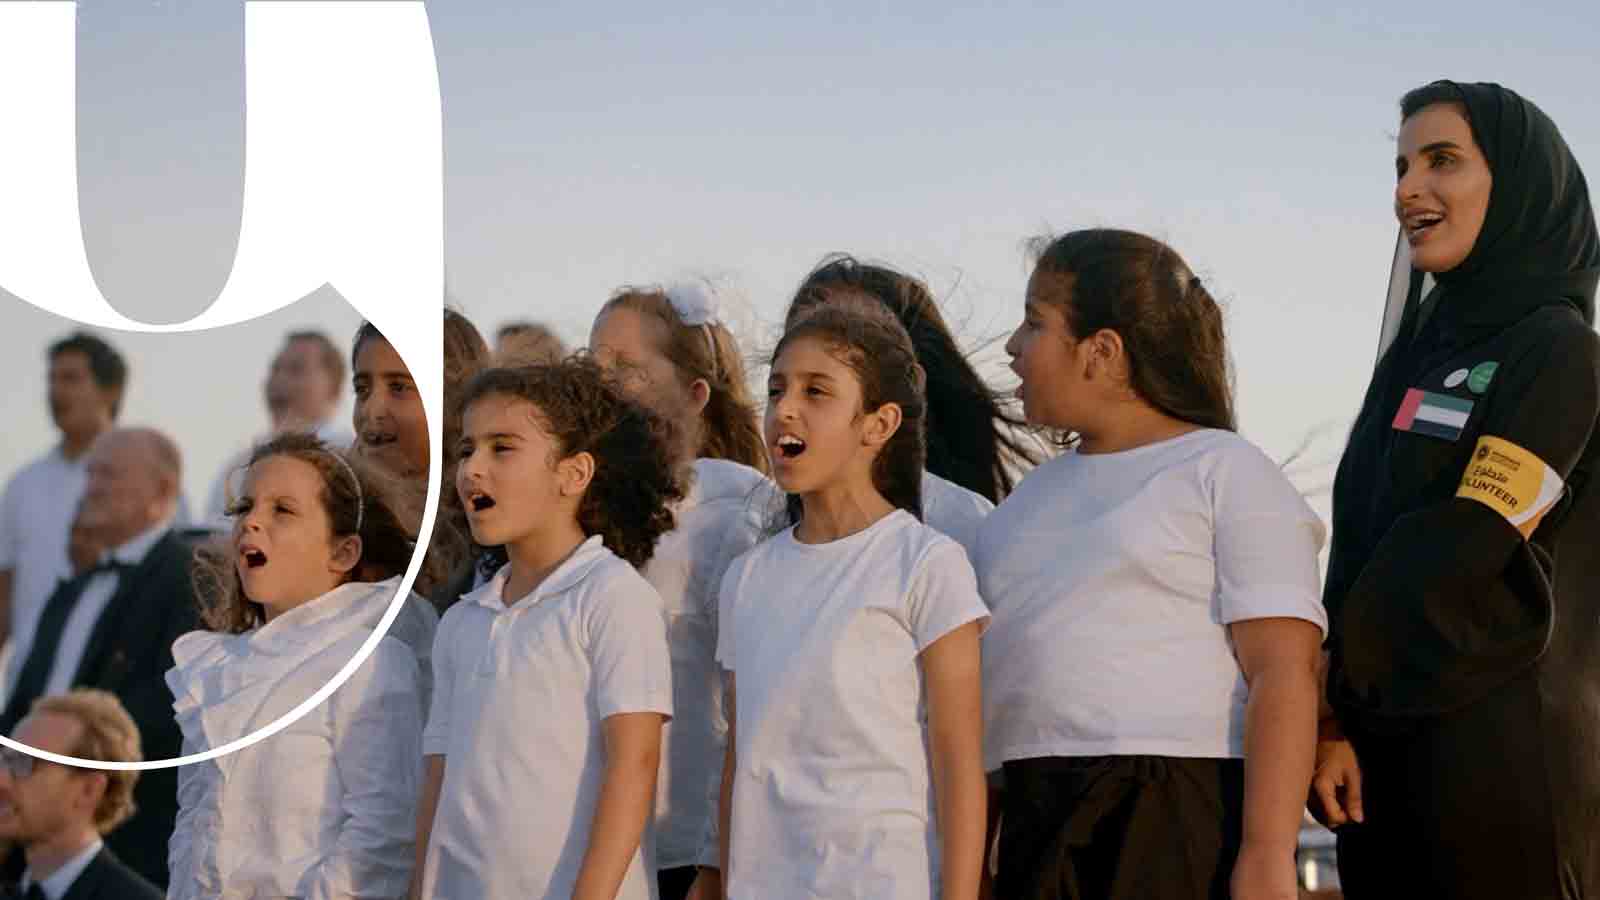 A group of children happily singing as part of a concert in the desert